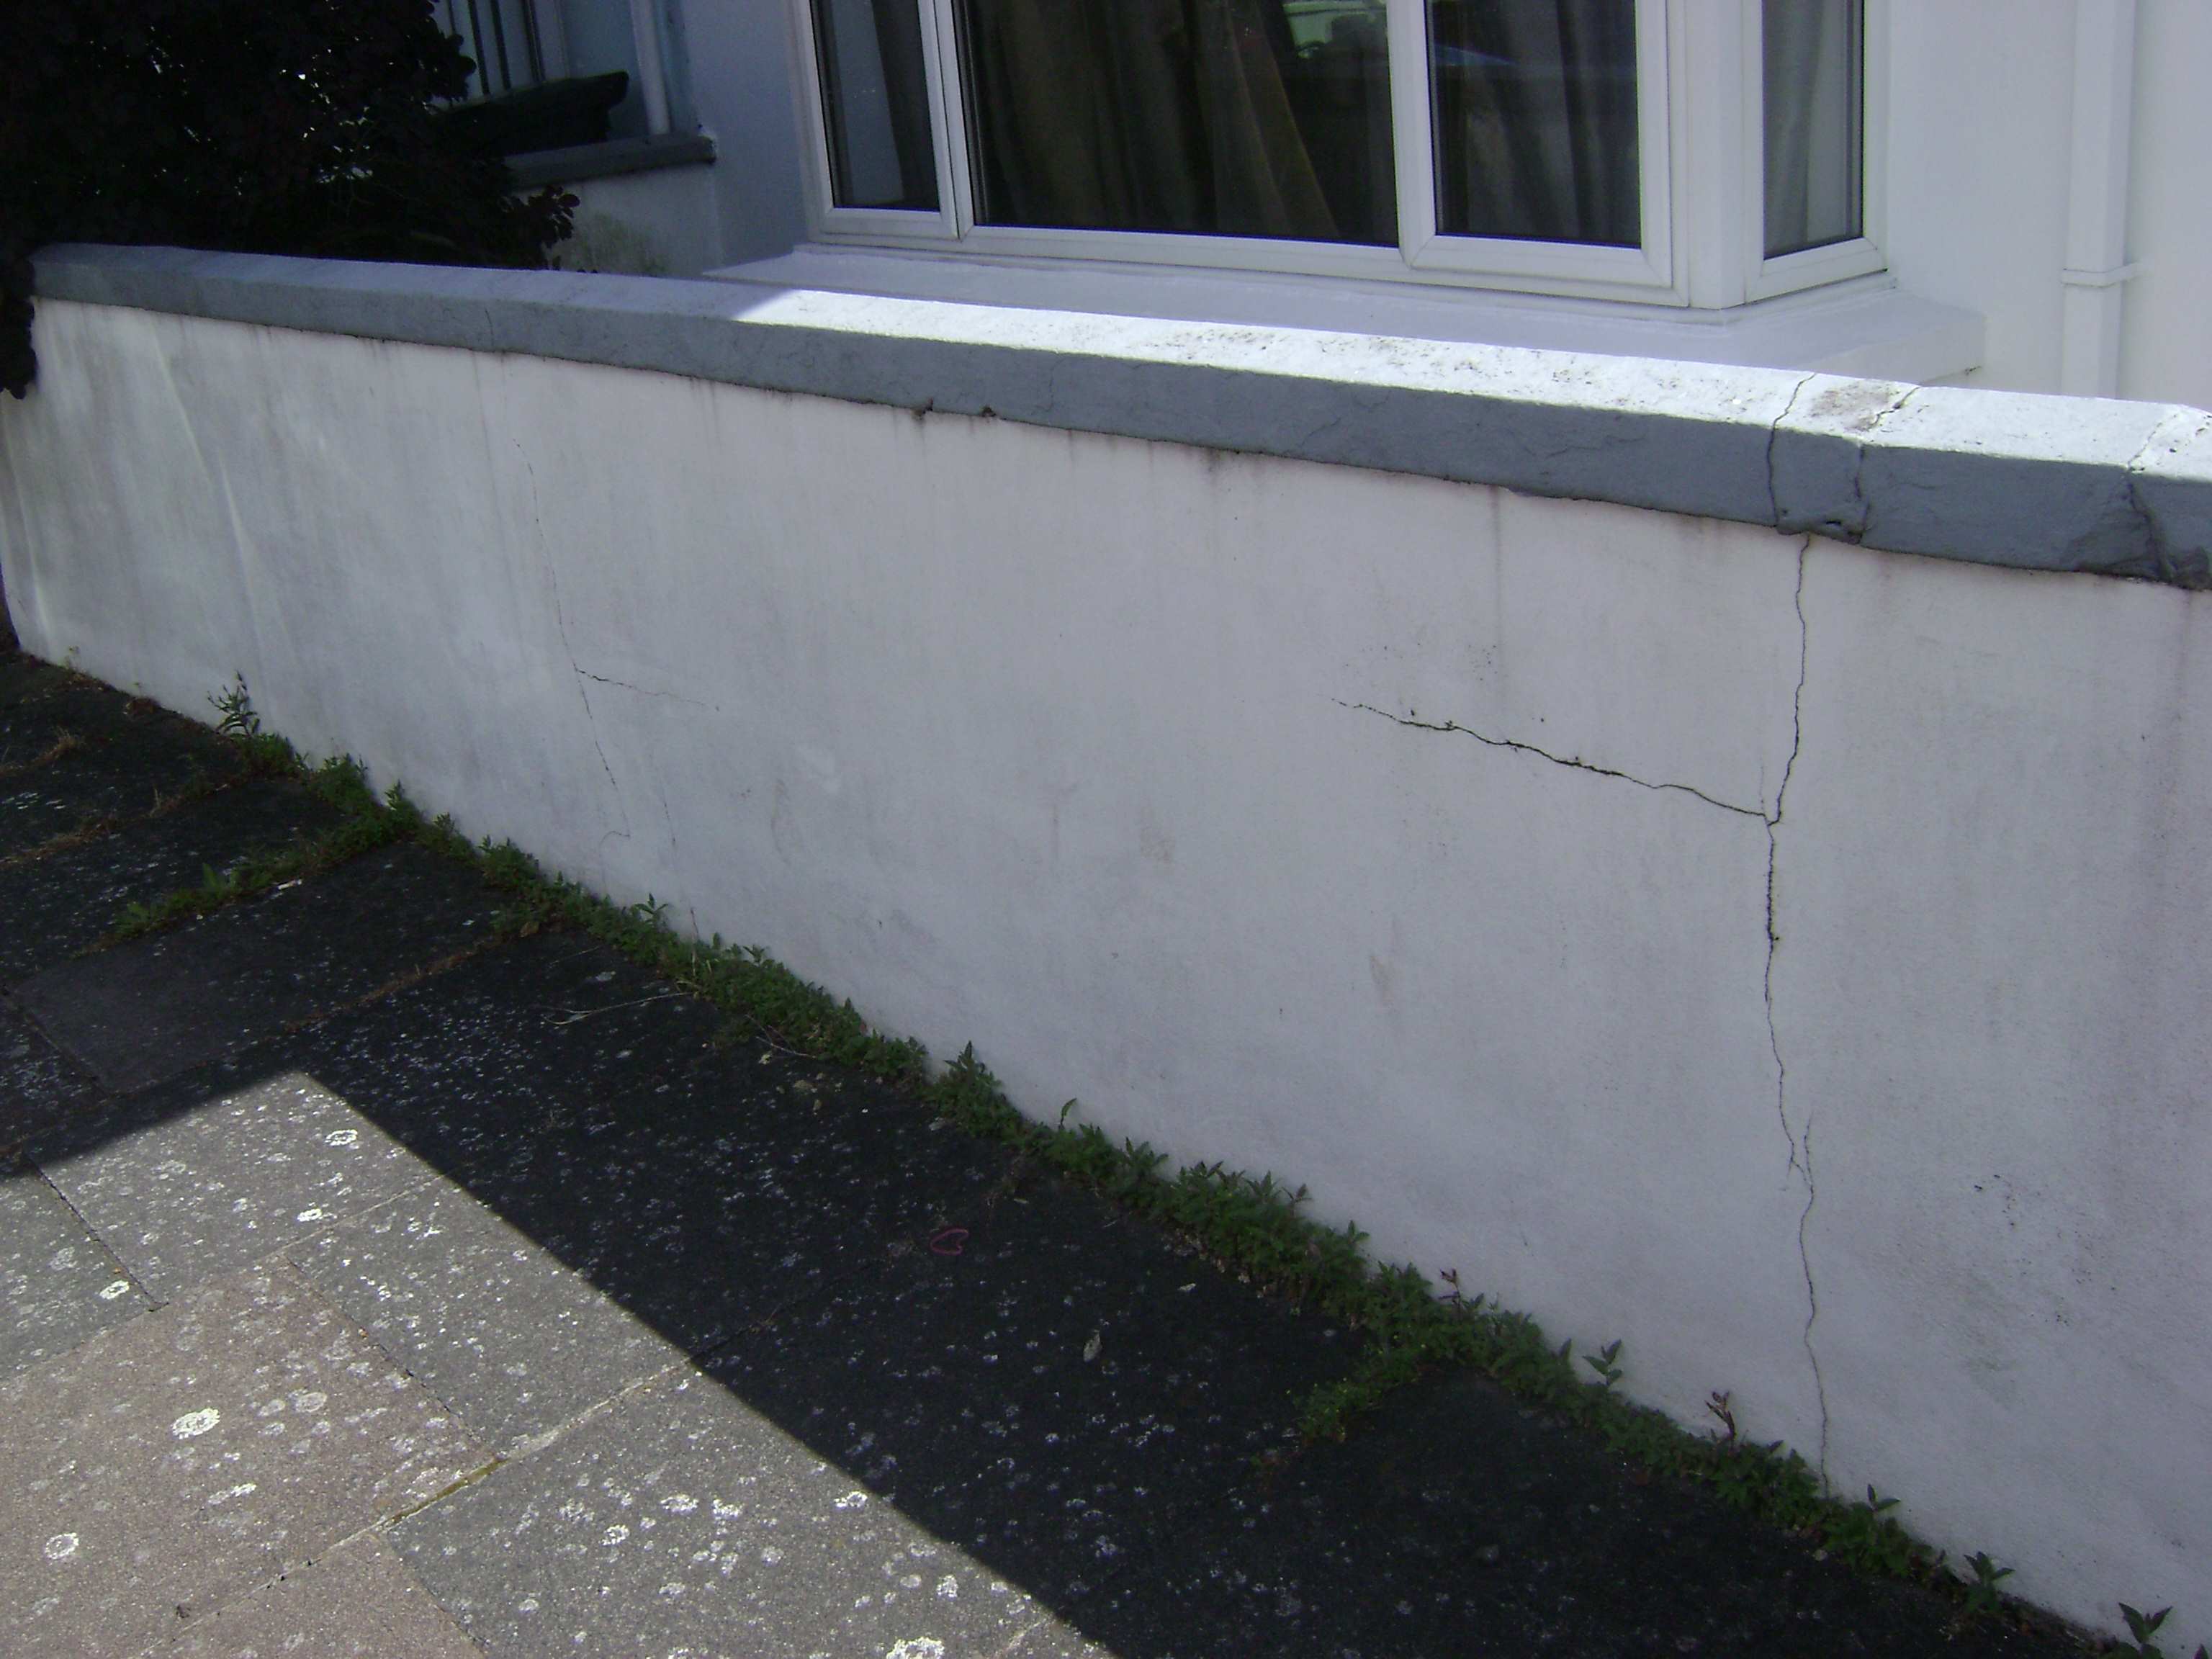 This garden wall had become badly cracked and blown over the years